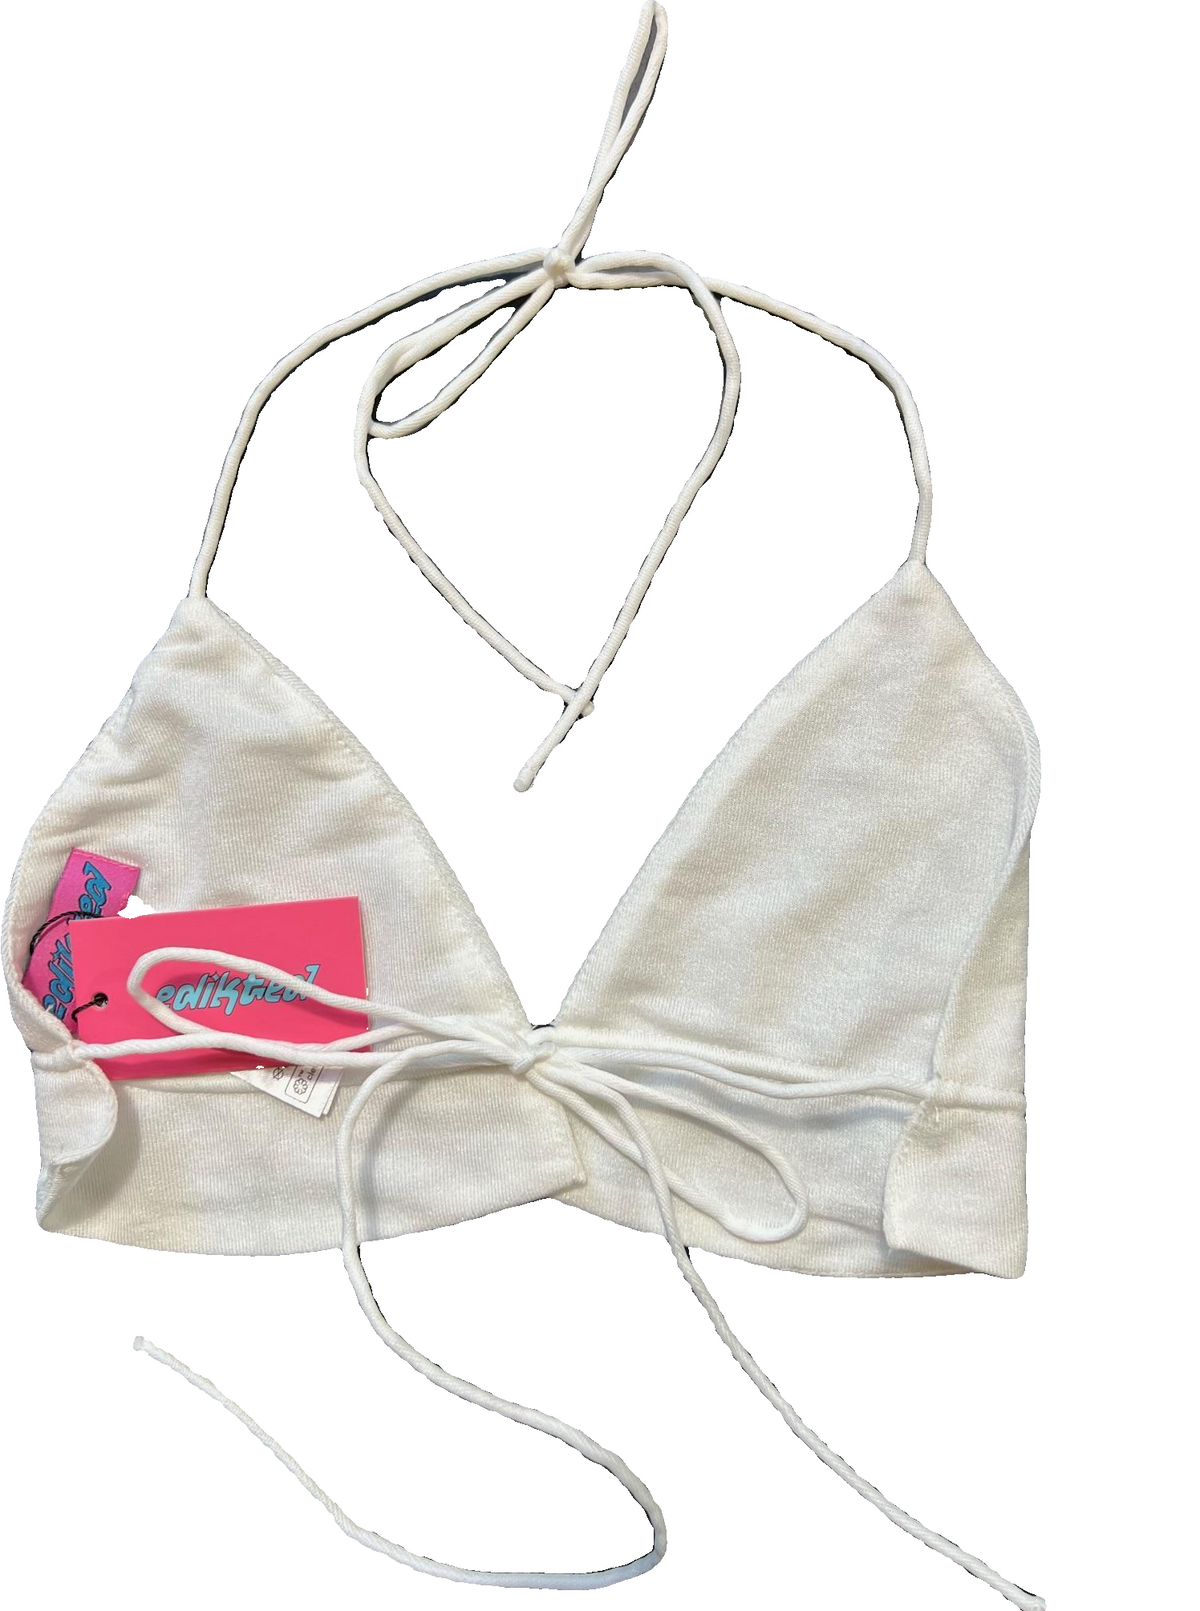 Edikted - White Triangle Swim Top - NEW WITH TAGS